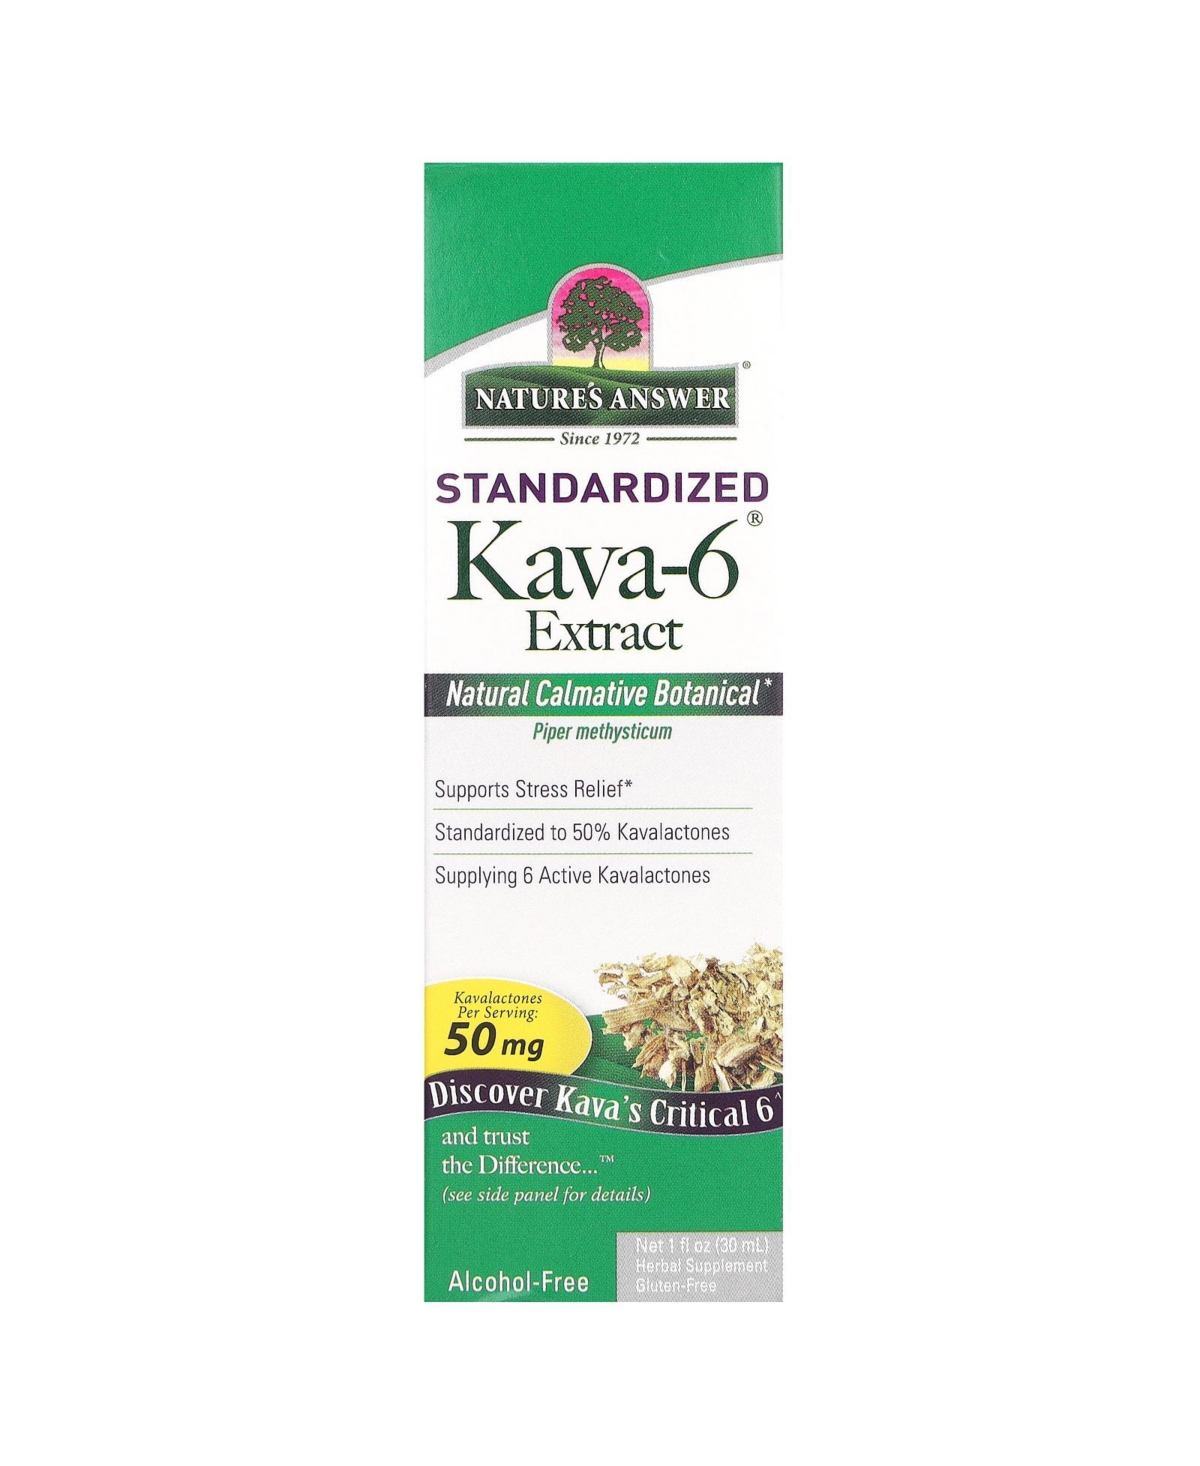 Kava-6 Extract Standardized Alcohol-Free - 1 fl oz (30 ml) - Assorted Pre-pack (See Table